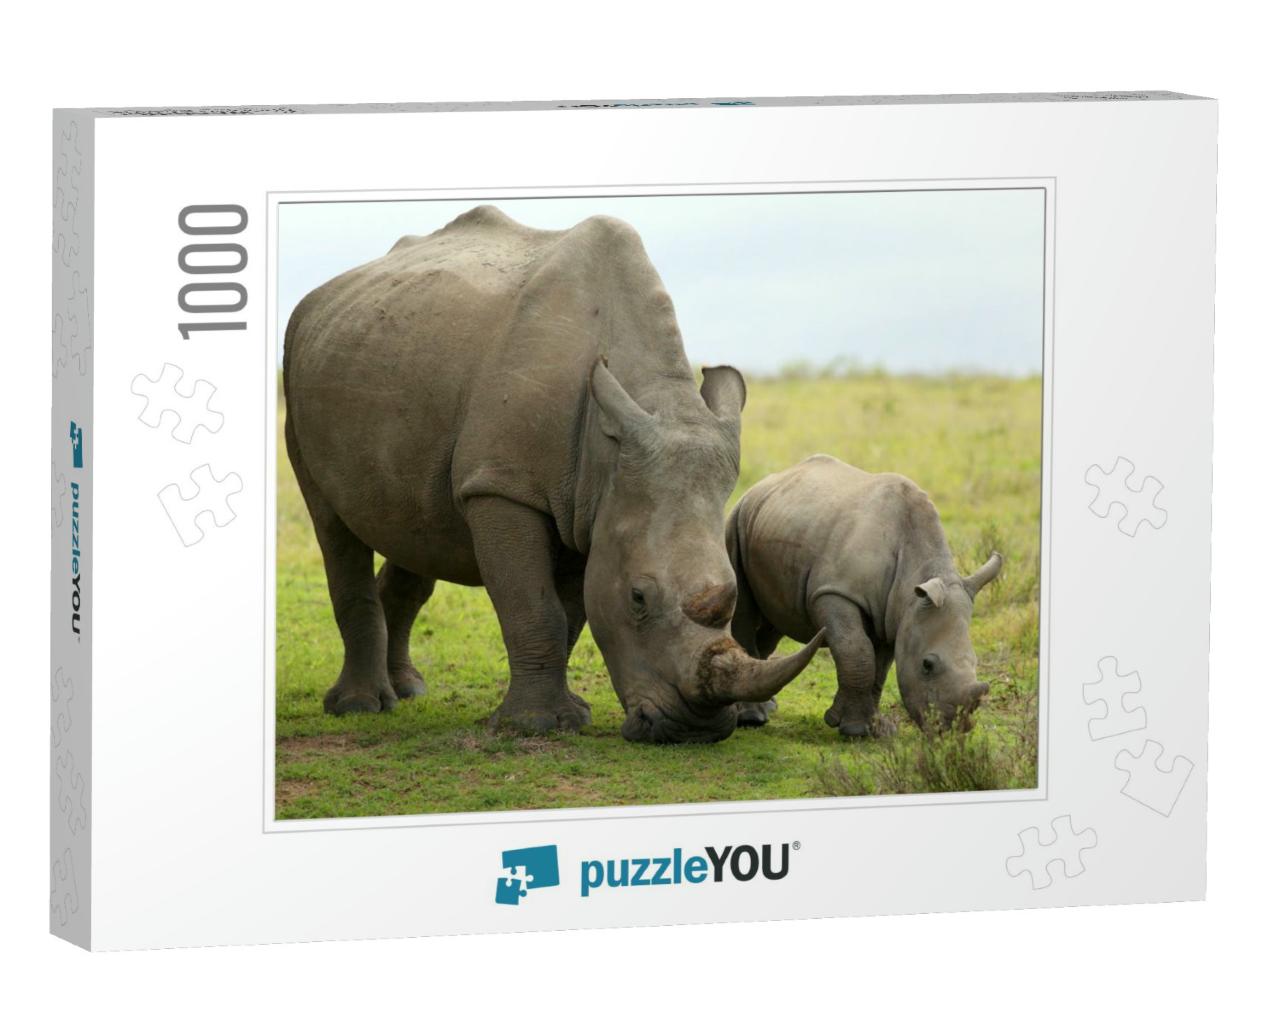 A Close Up of a Female Rhino / Rhinoceros & Her Calf. Sho... Jigsaw Puzzle with 1000 pieces